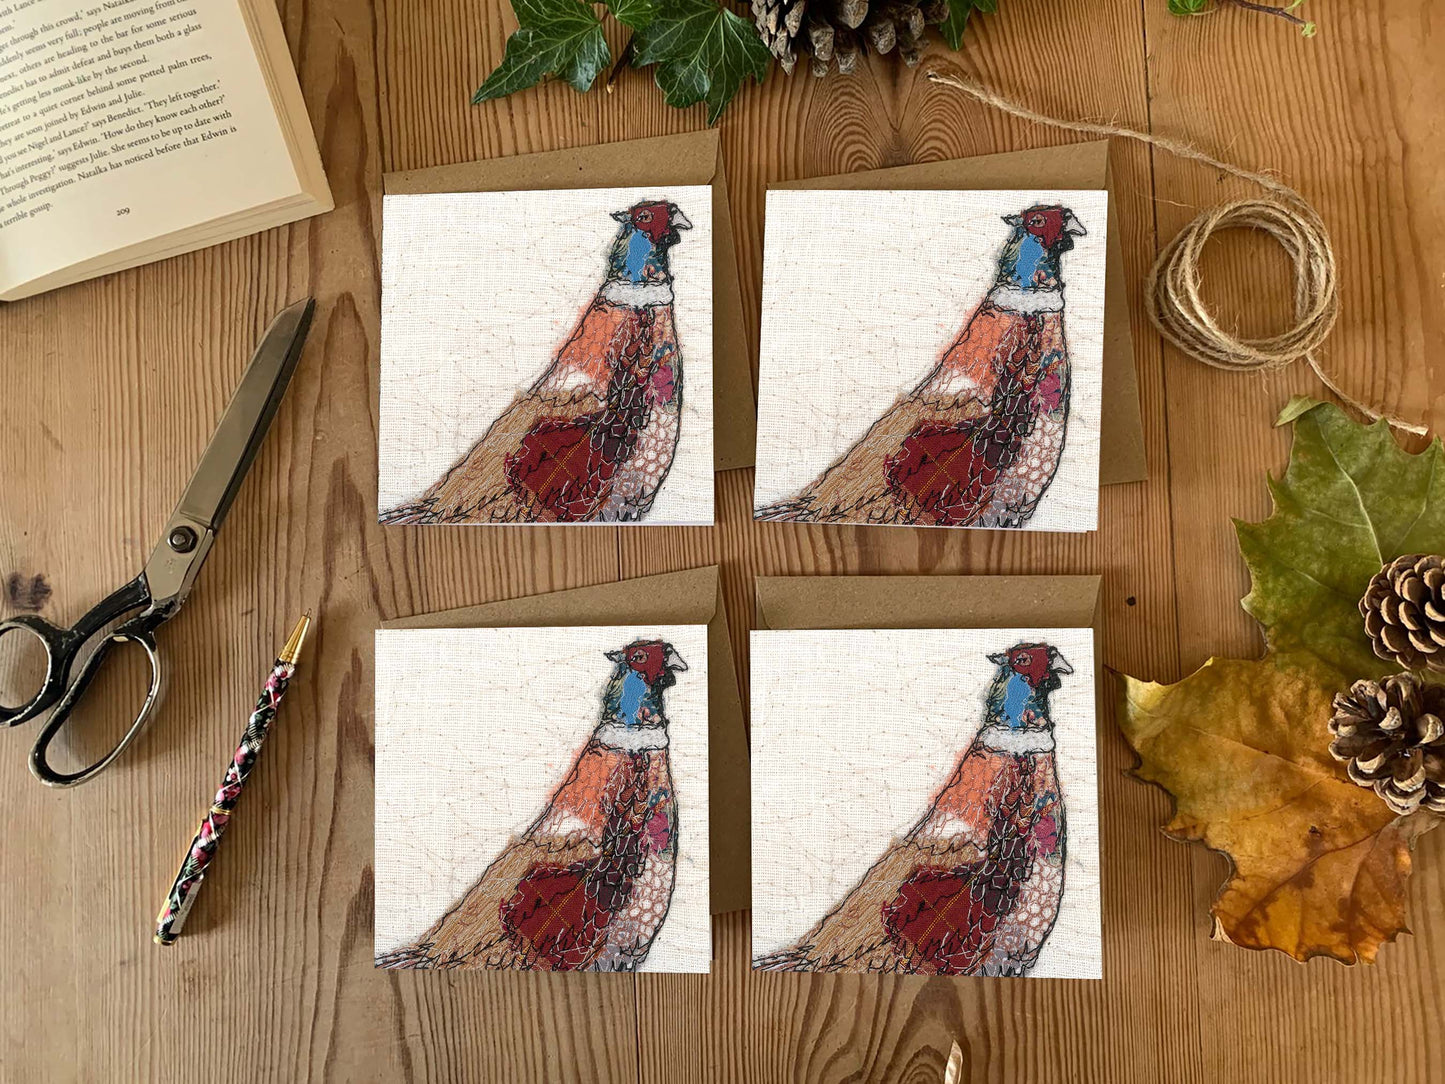 Furtive Field Pheasant Cards (Pack of 4)